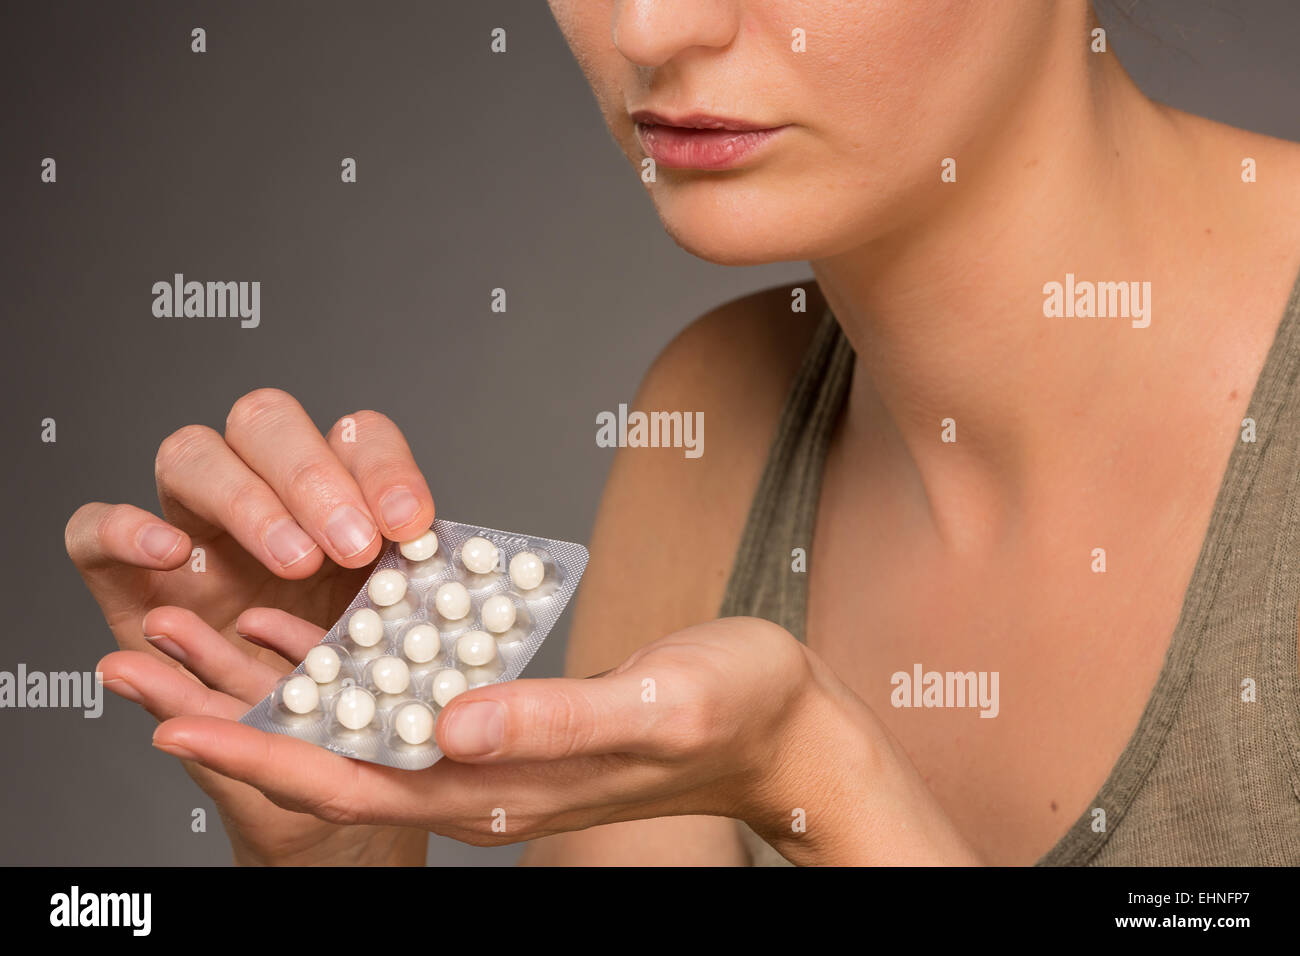 Woman taking an hormone replacement therapy pills. Stock Photo